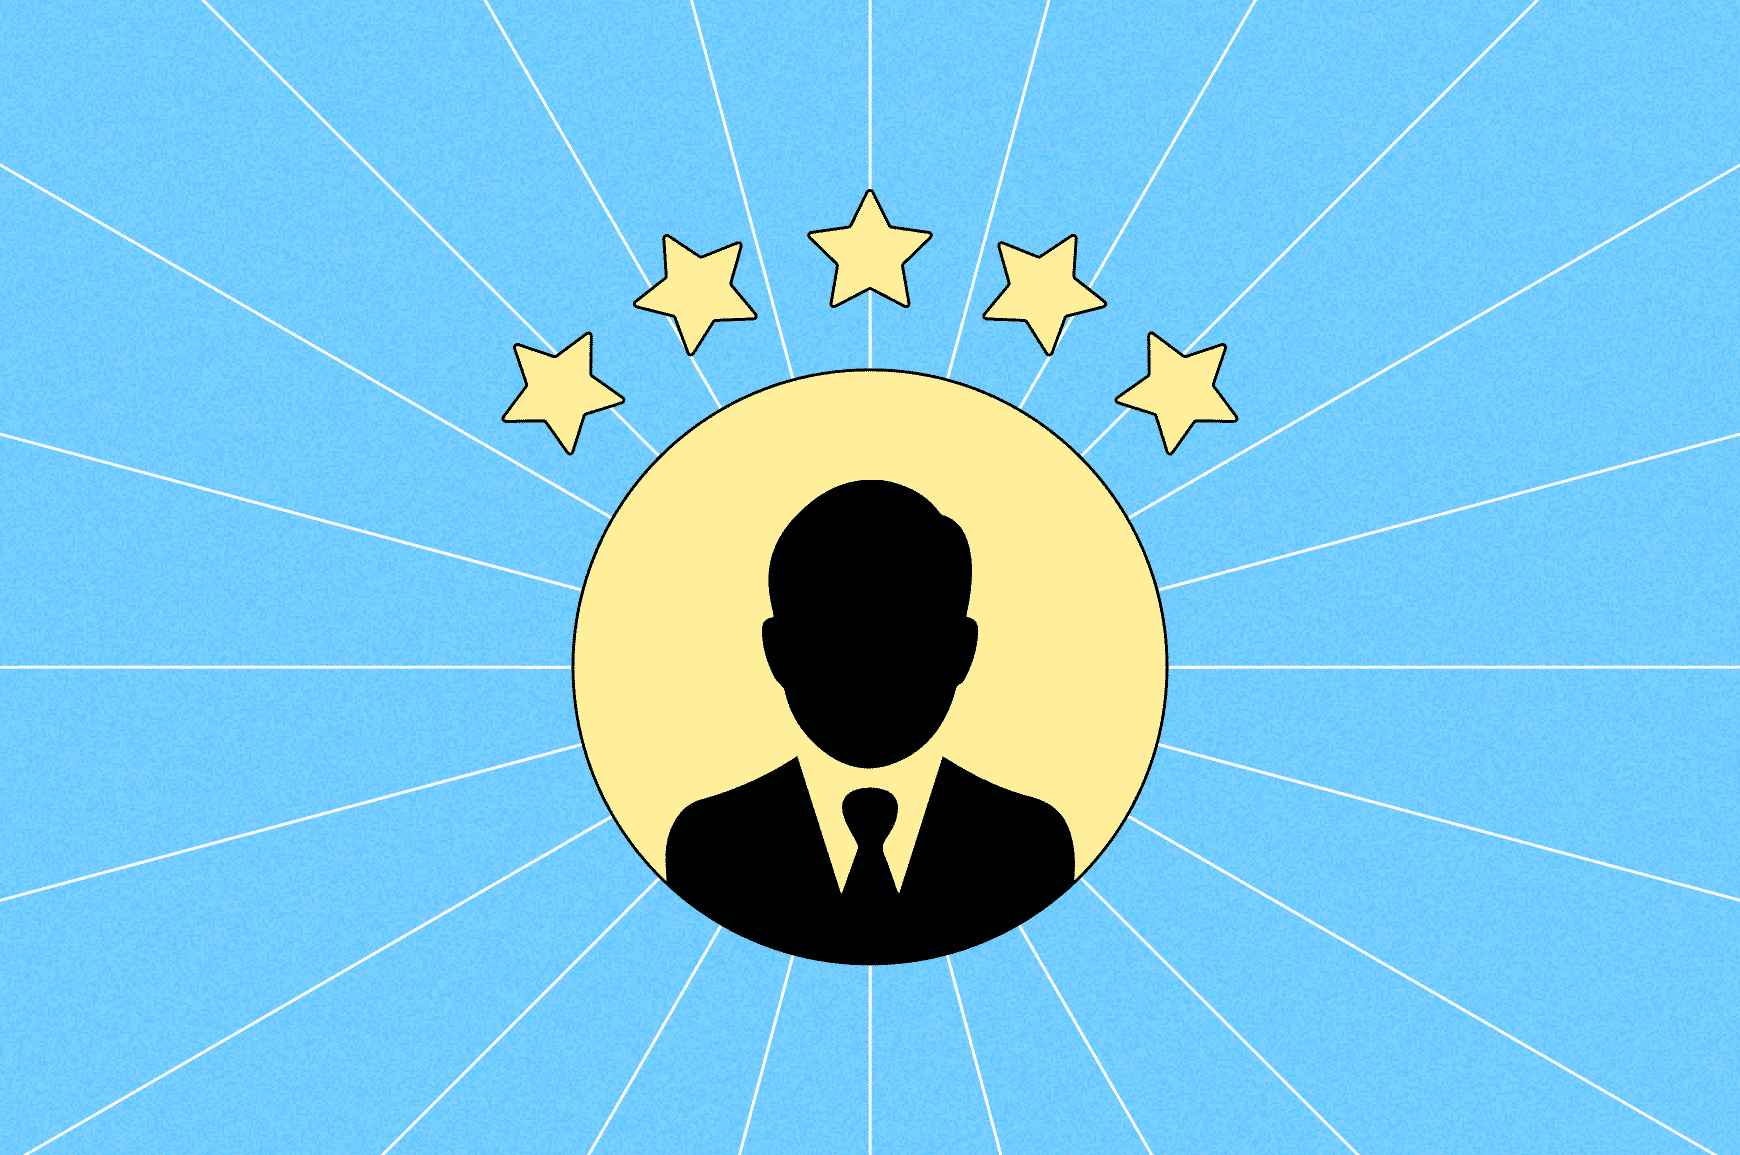 Silhouette of a man with 5 stars above him